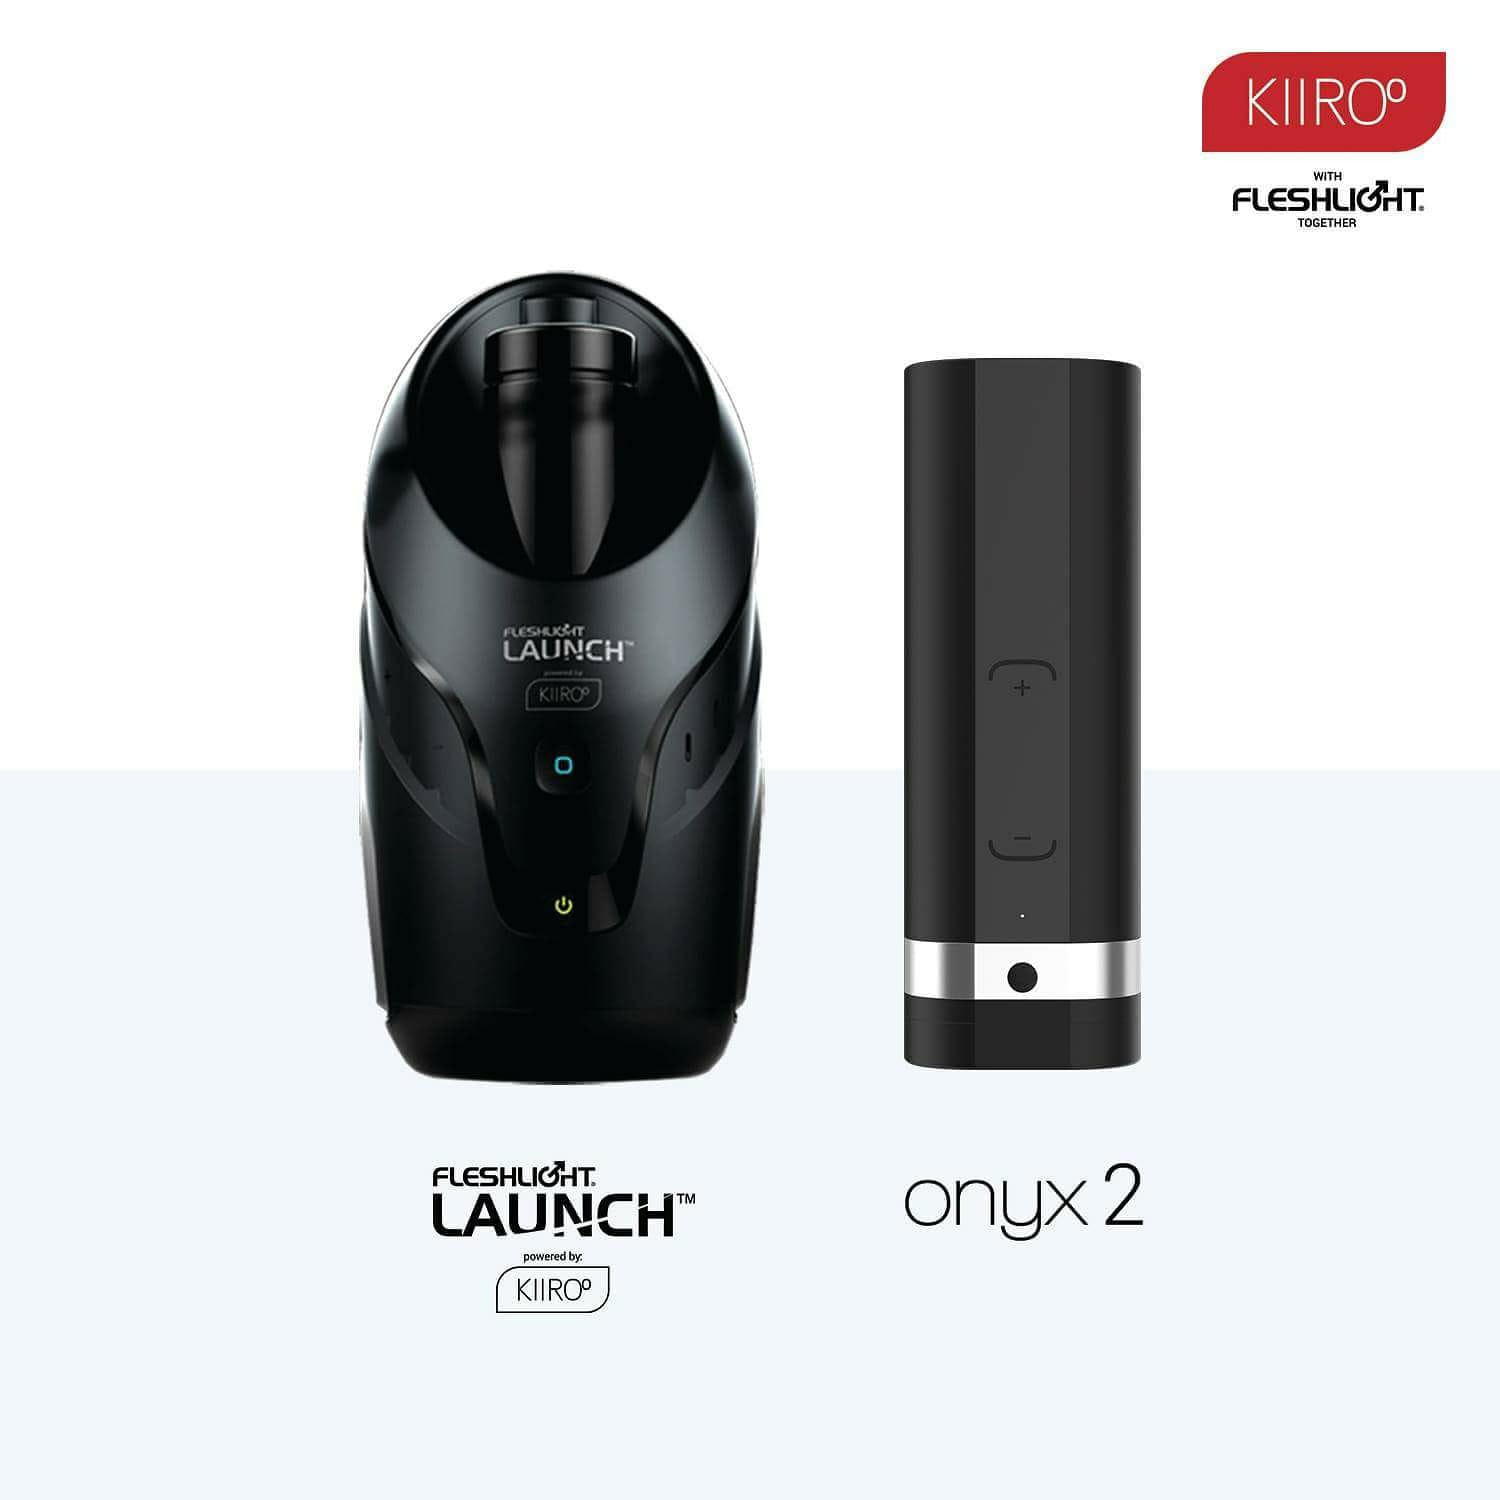 Above: Kiroo’s Fleshlight Launch and Onyx 2.